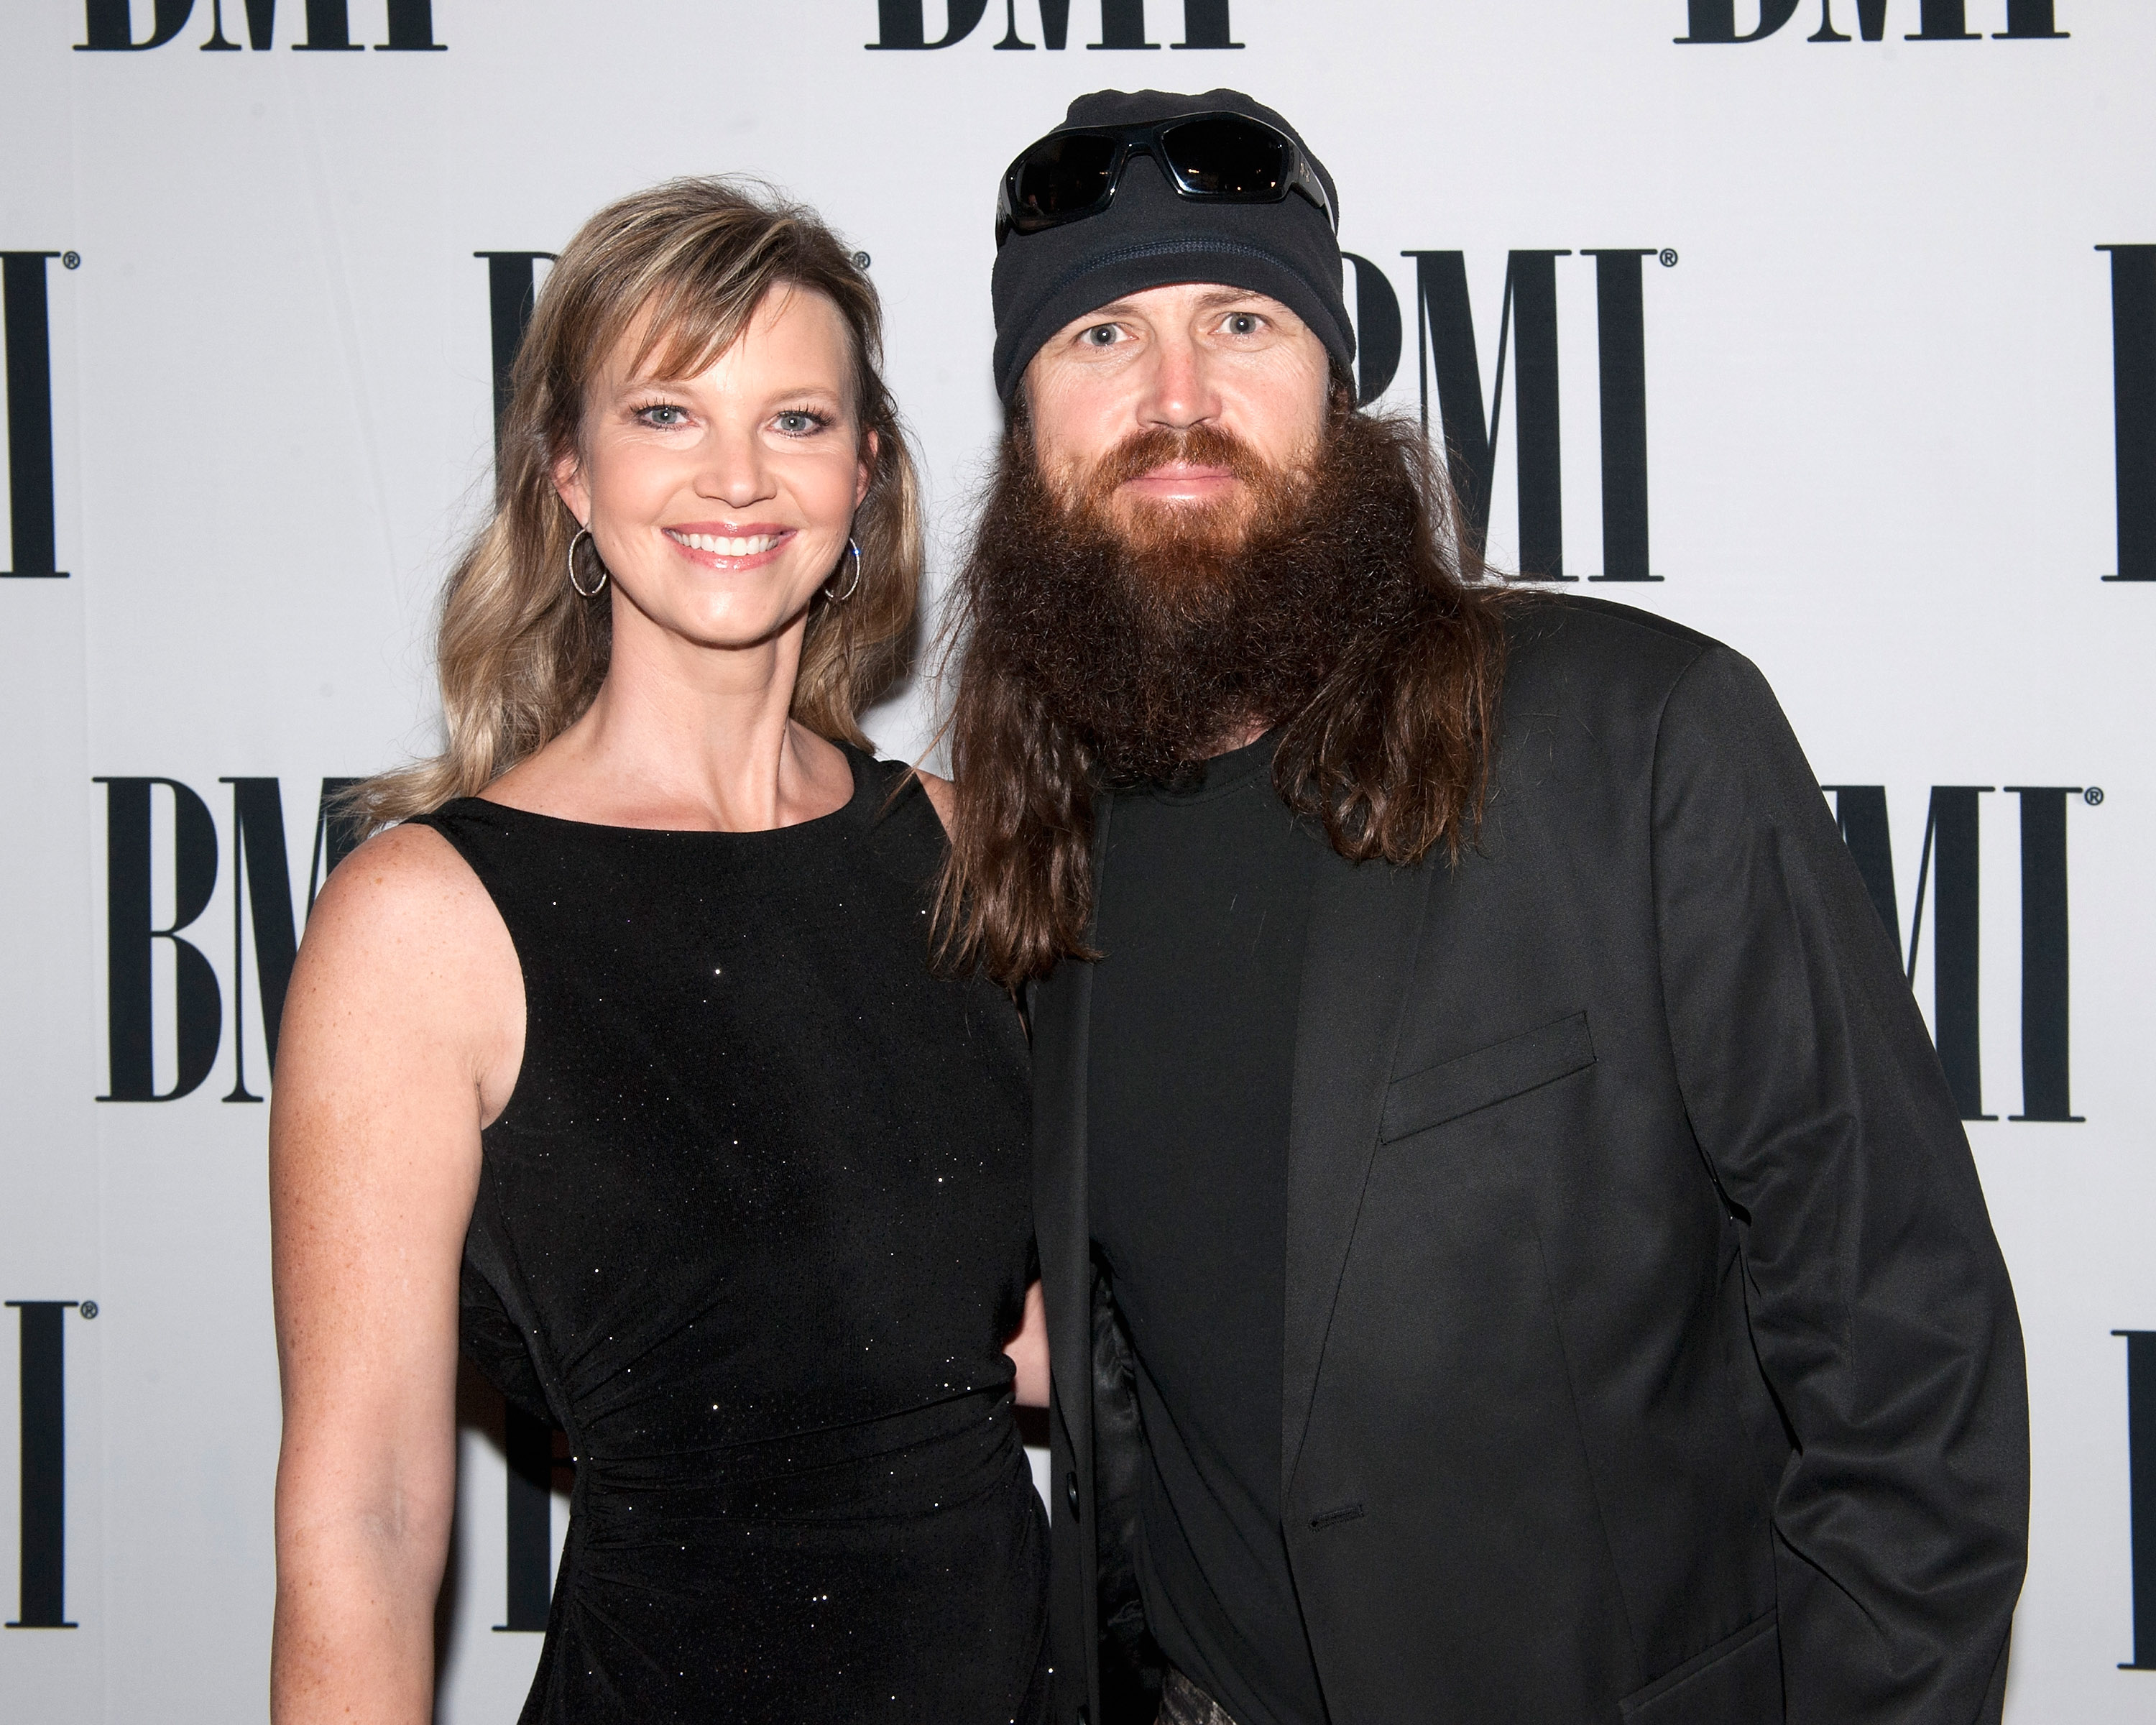 Missy Robertson and Jase Robertson attend the 61st annual BMI Country Awards on November 5, 2013, in Nashville, Tennessee. | Source: Getty Images